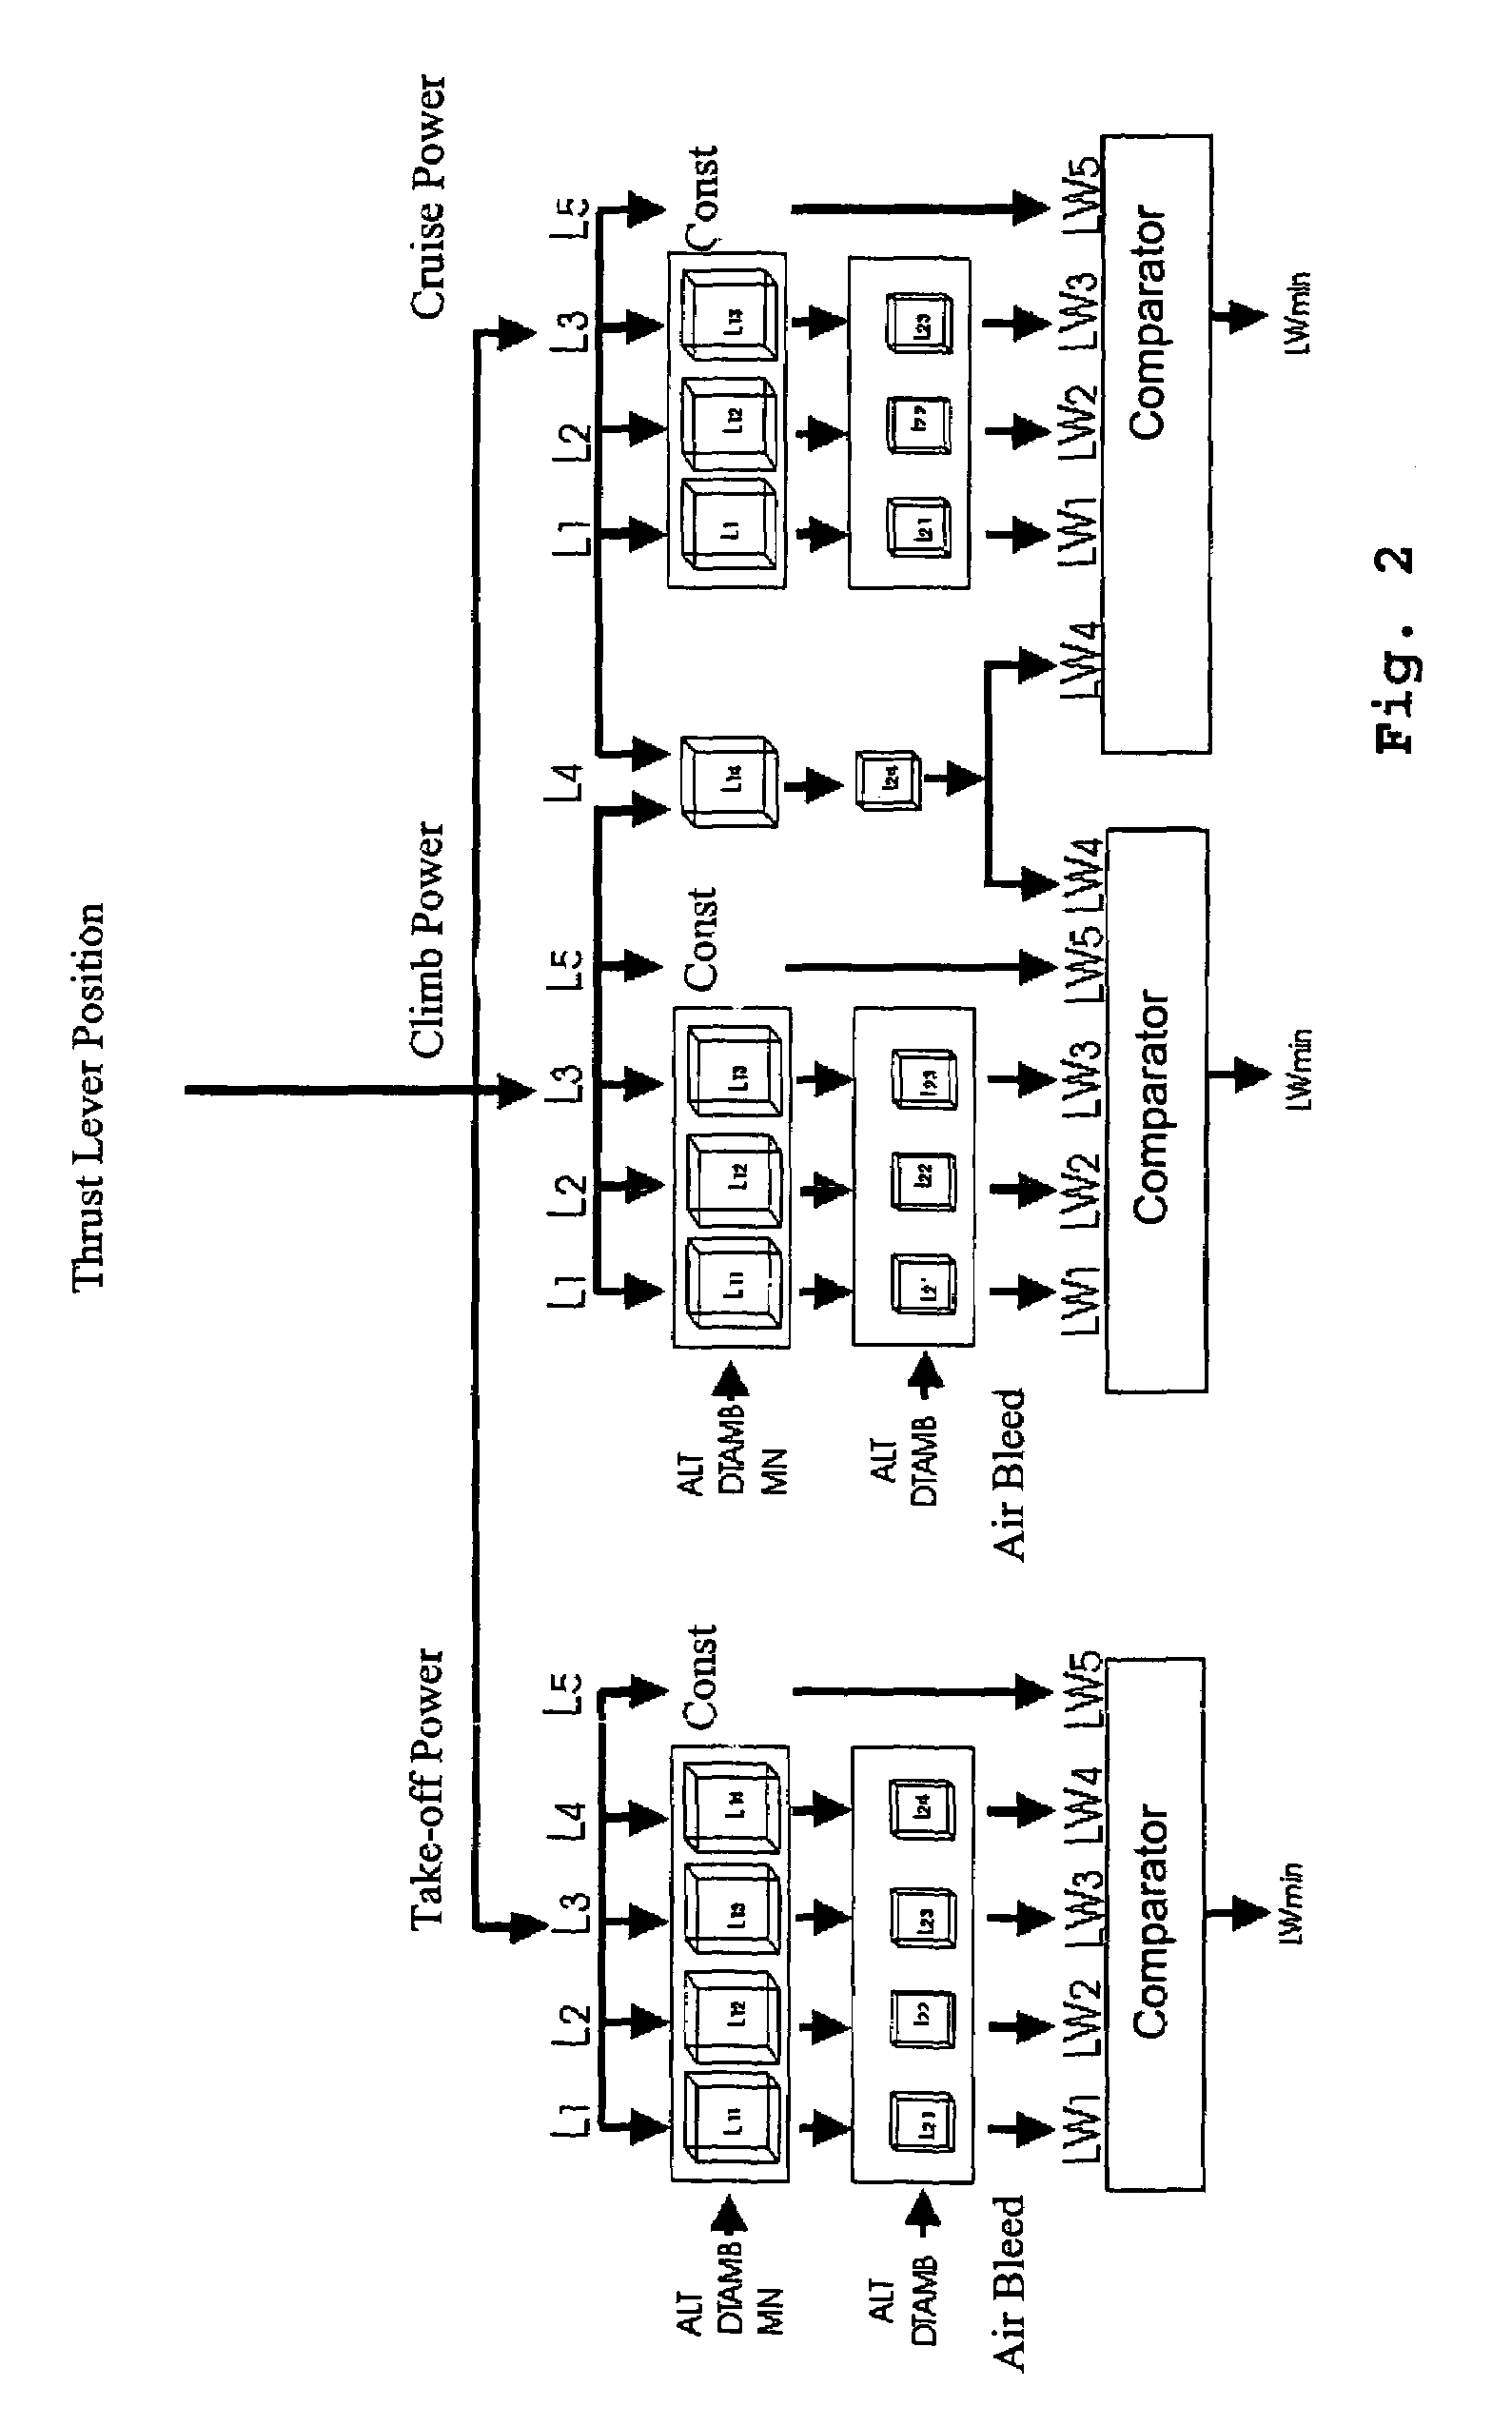 Control system for an aircraft engine